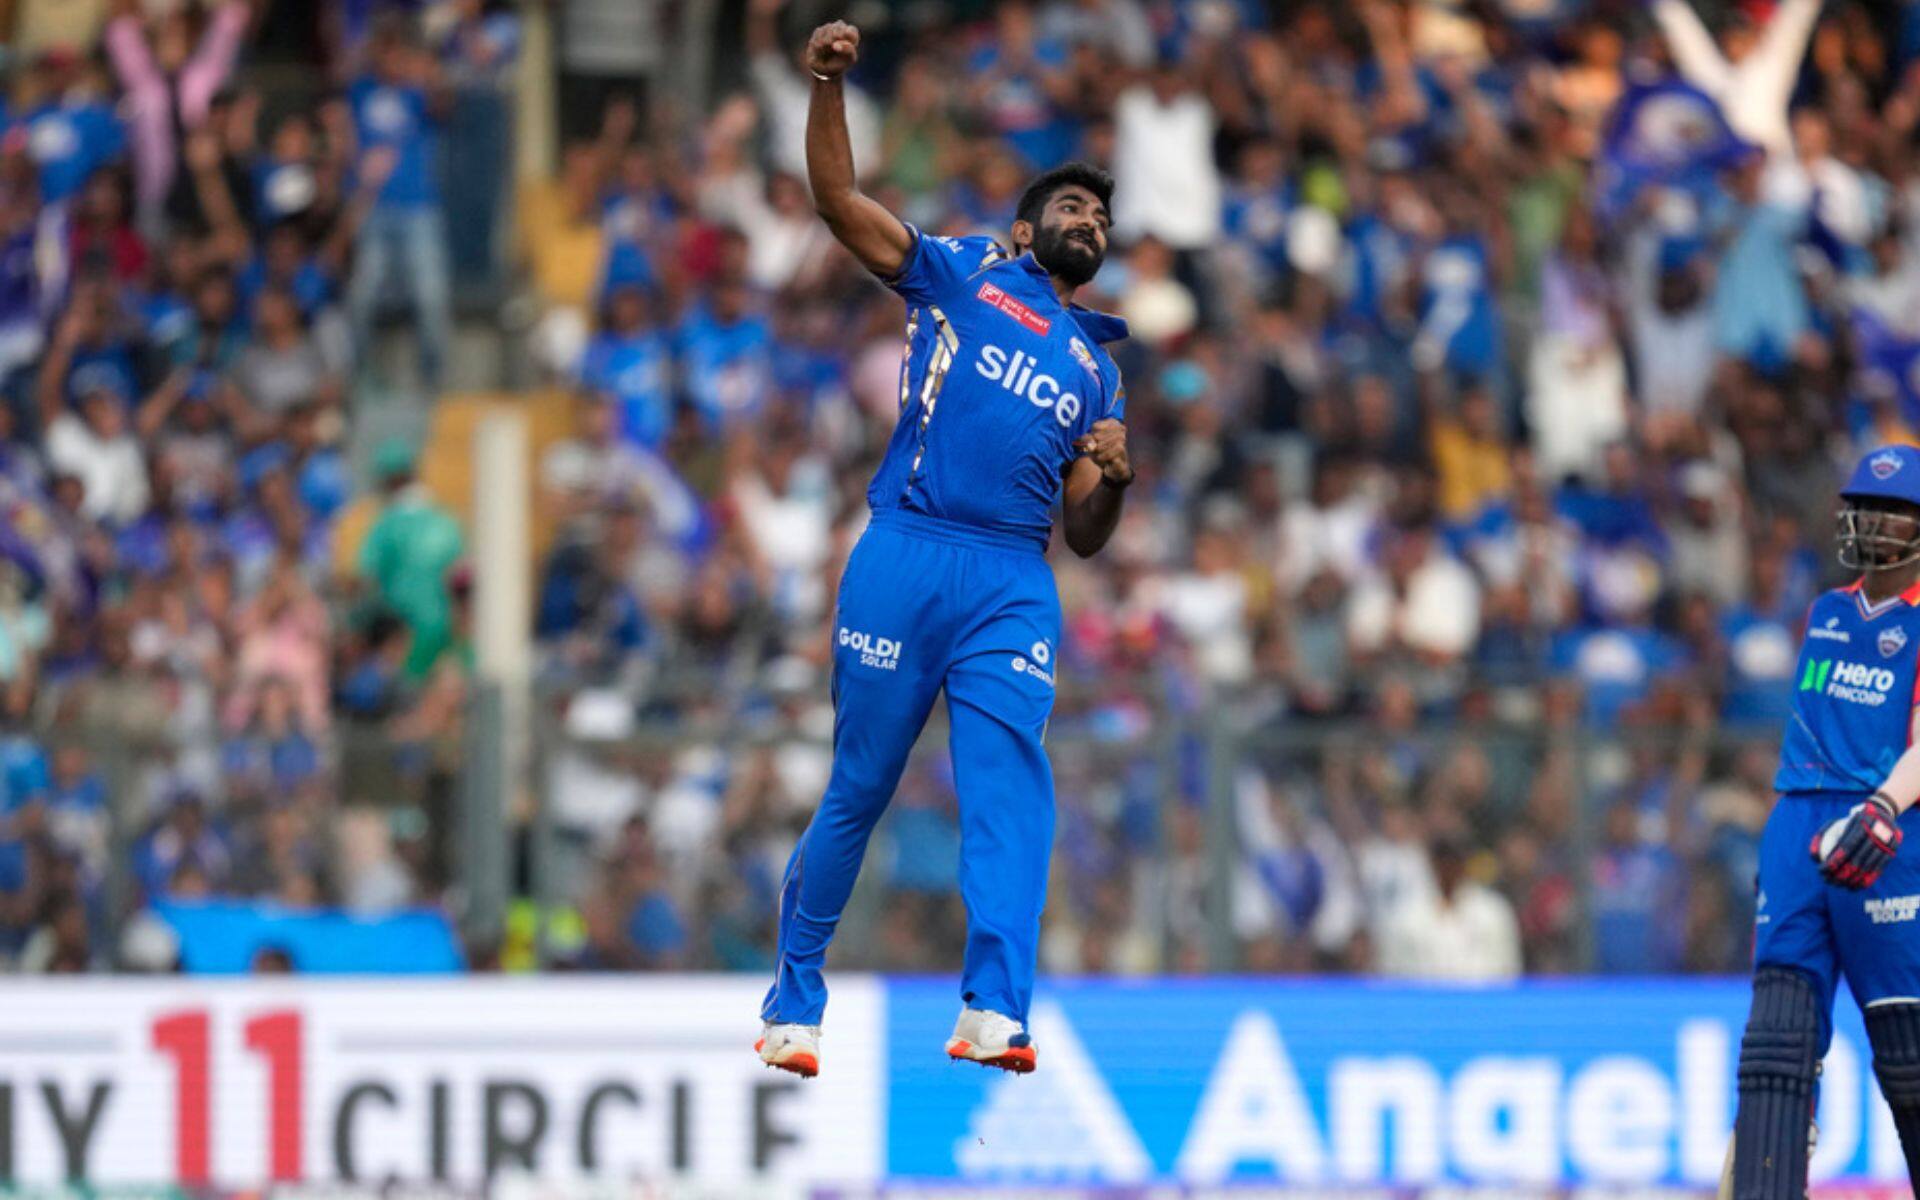 Jasprit Bumrah will be a key player for MI in this game [AP Photos]